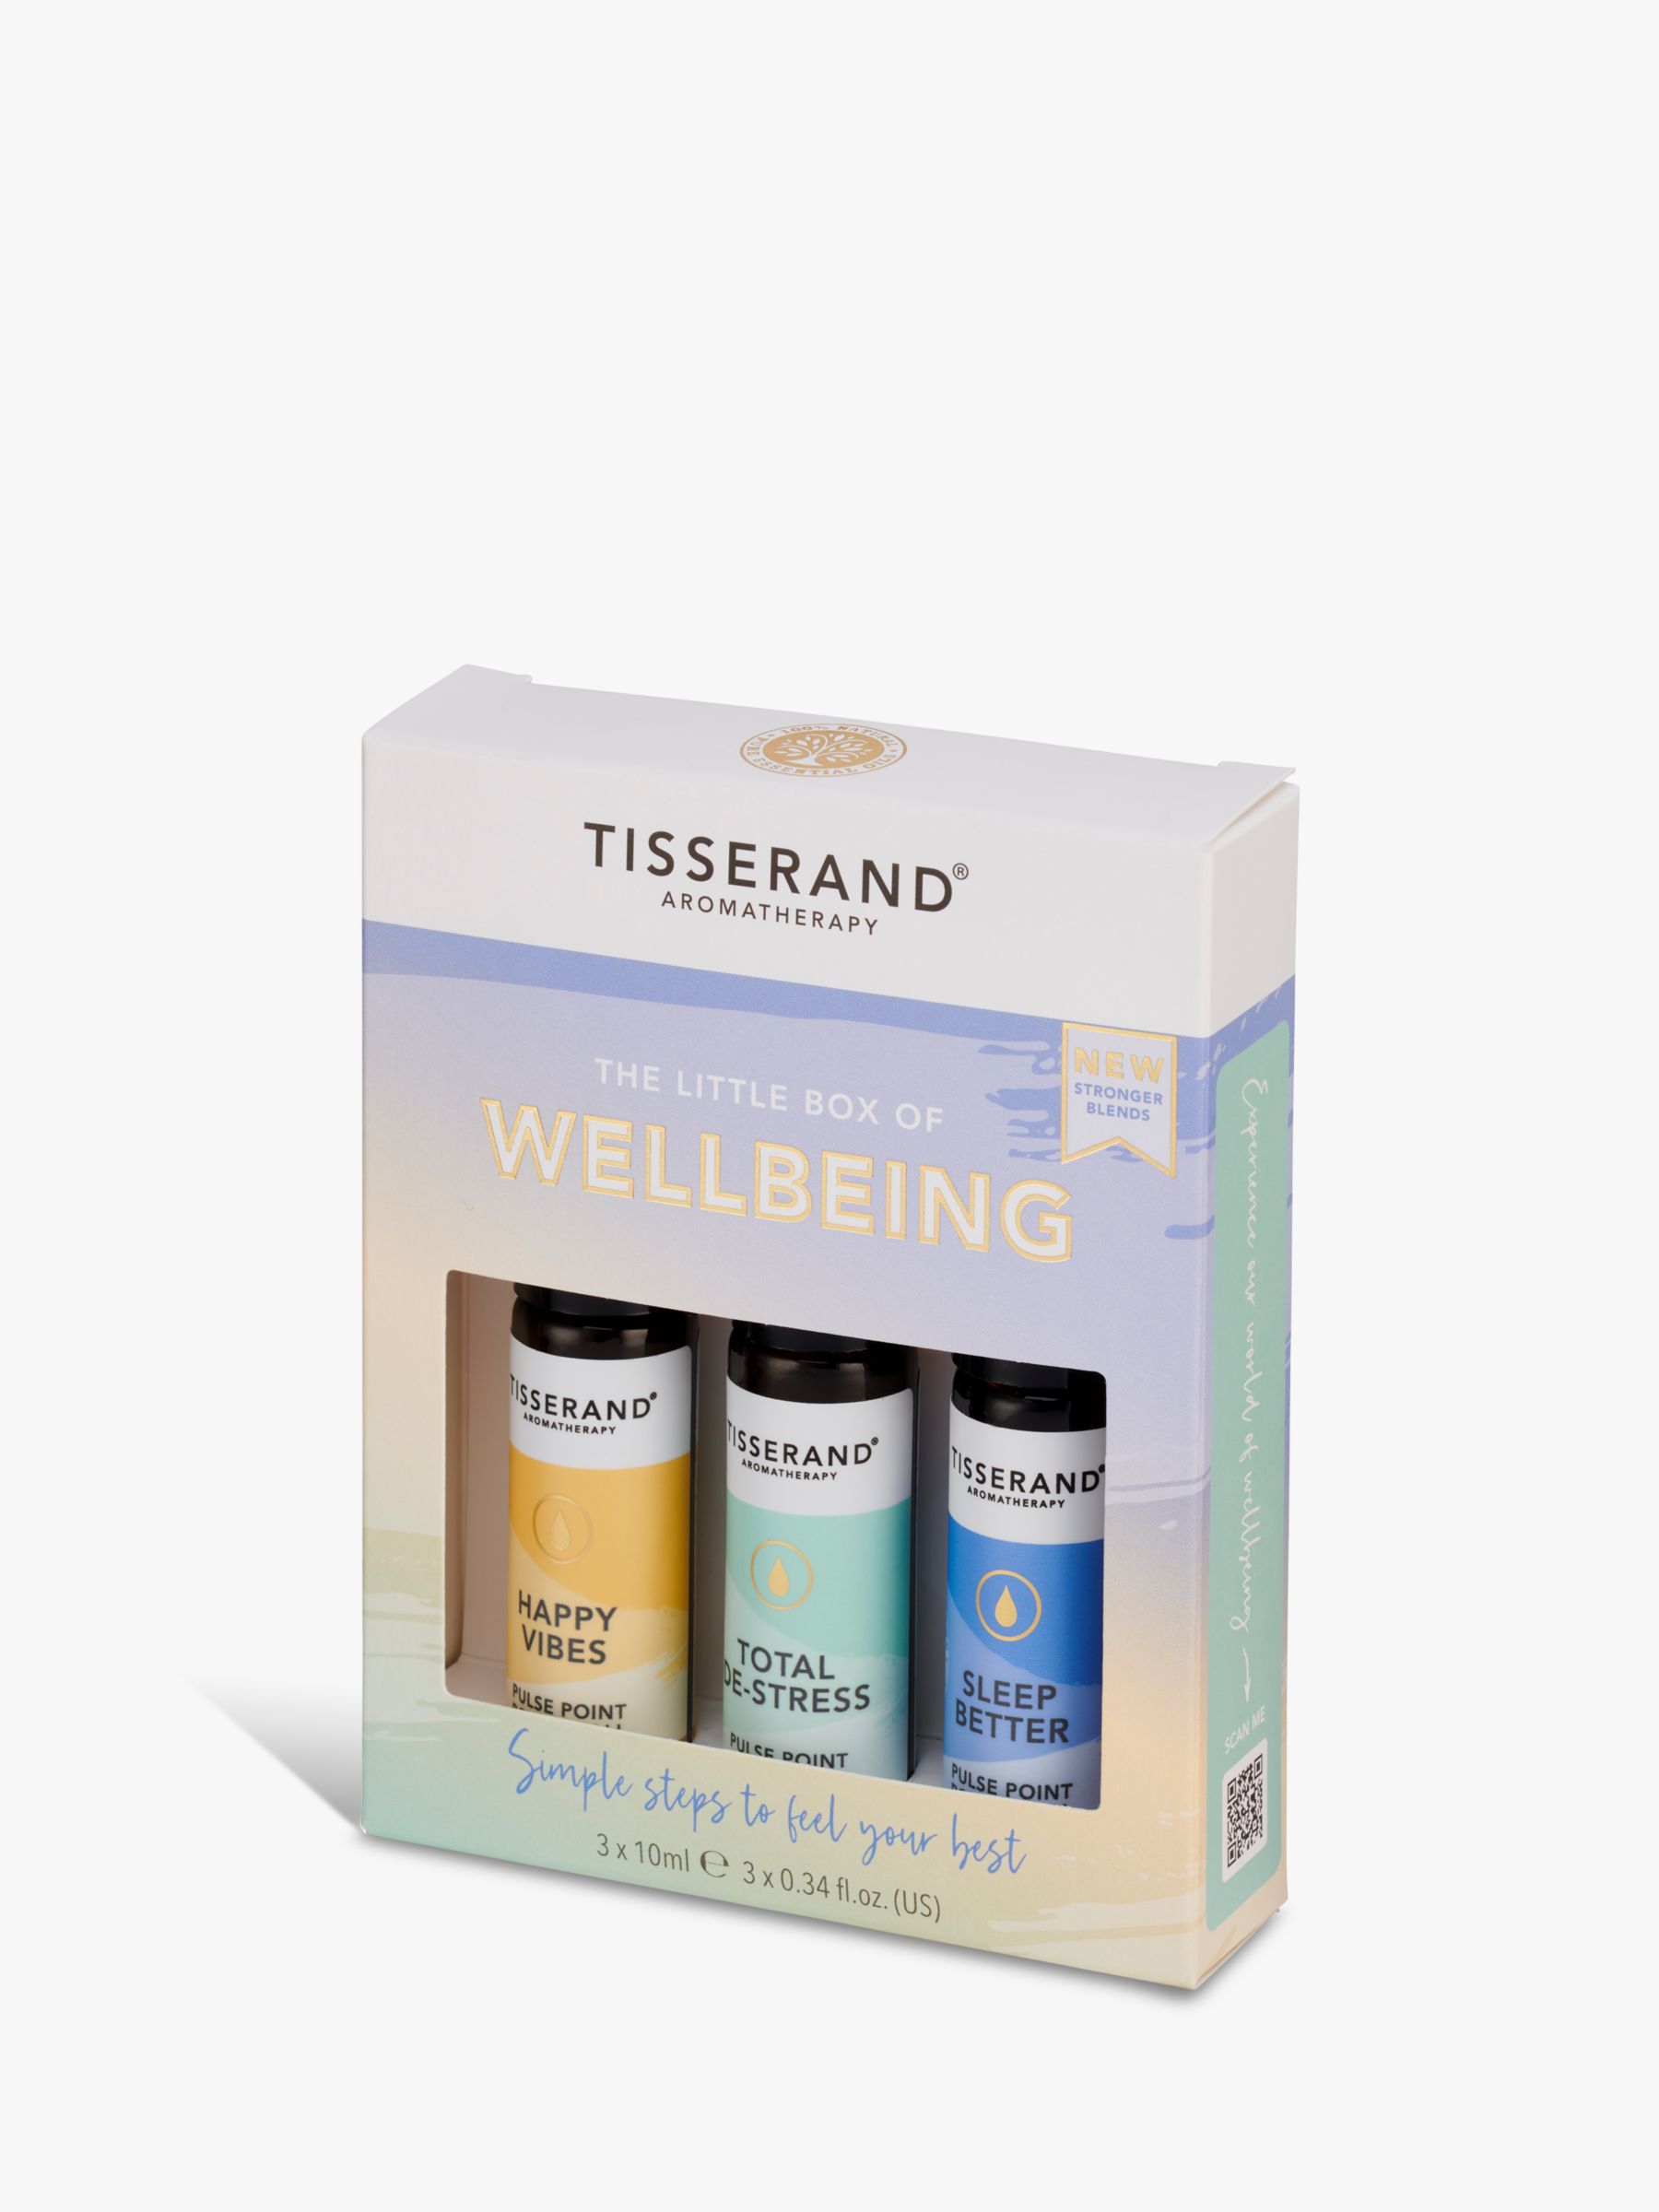 Tisserand Aromatherapy The Little Box of Wellbeing Bodycare Gift Set 4